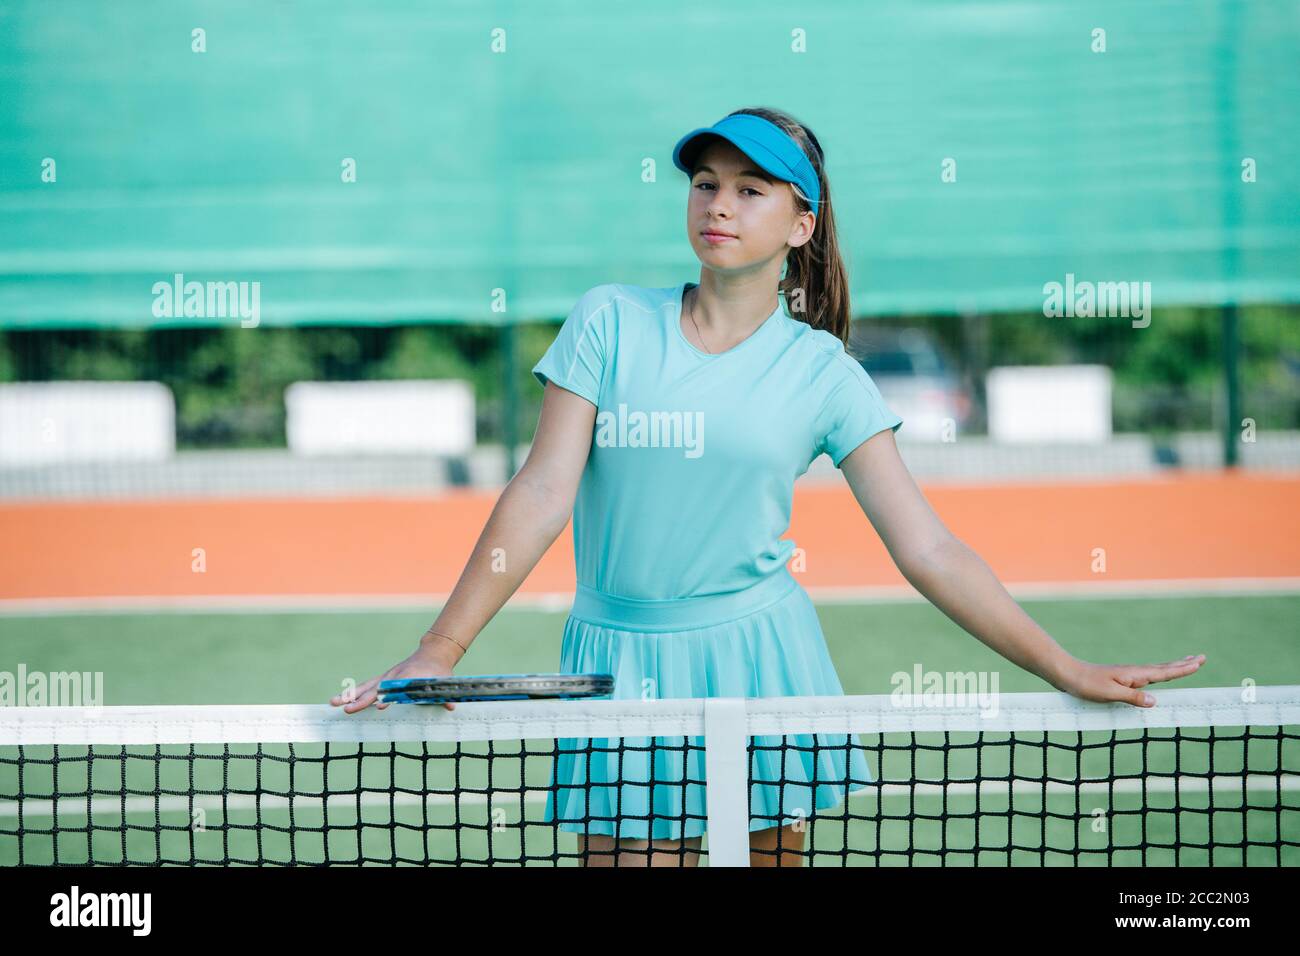 Portrait of a teenage girl standing on tennis court, leaning on the net, resting Stock Photo